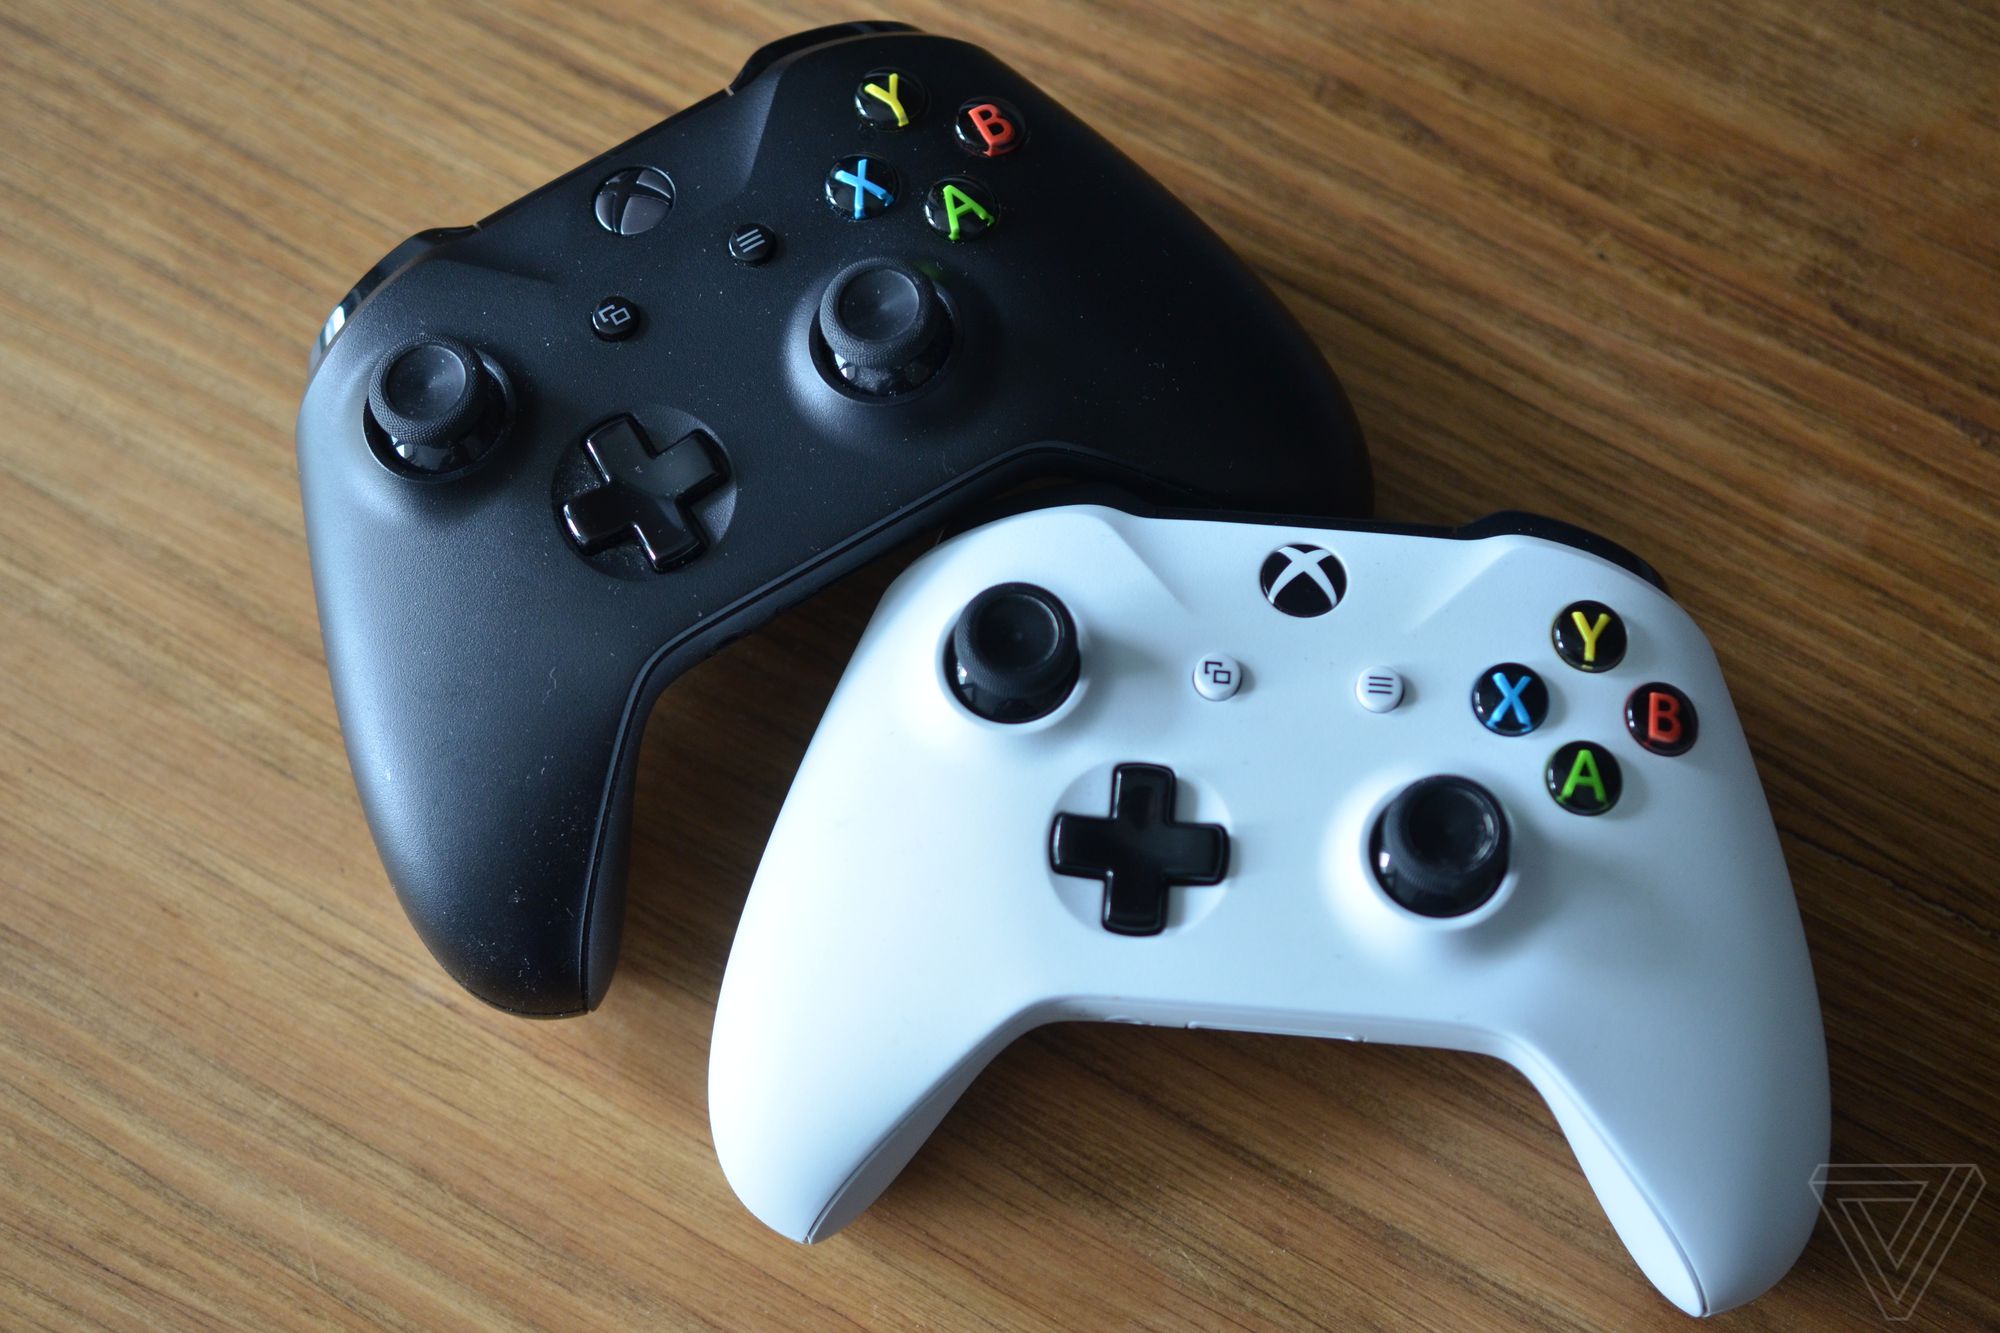 dichtbij satelliet Glimp Microsoft's new Xbox controller firmware lets you quickly switch between  paired devices - The Verge